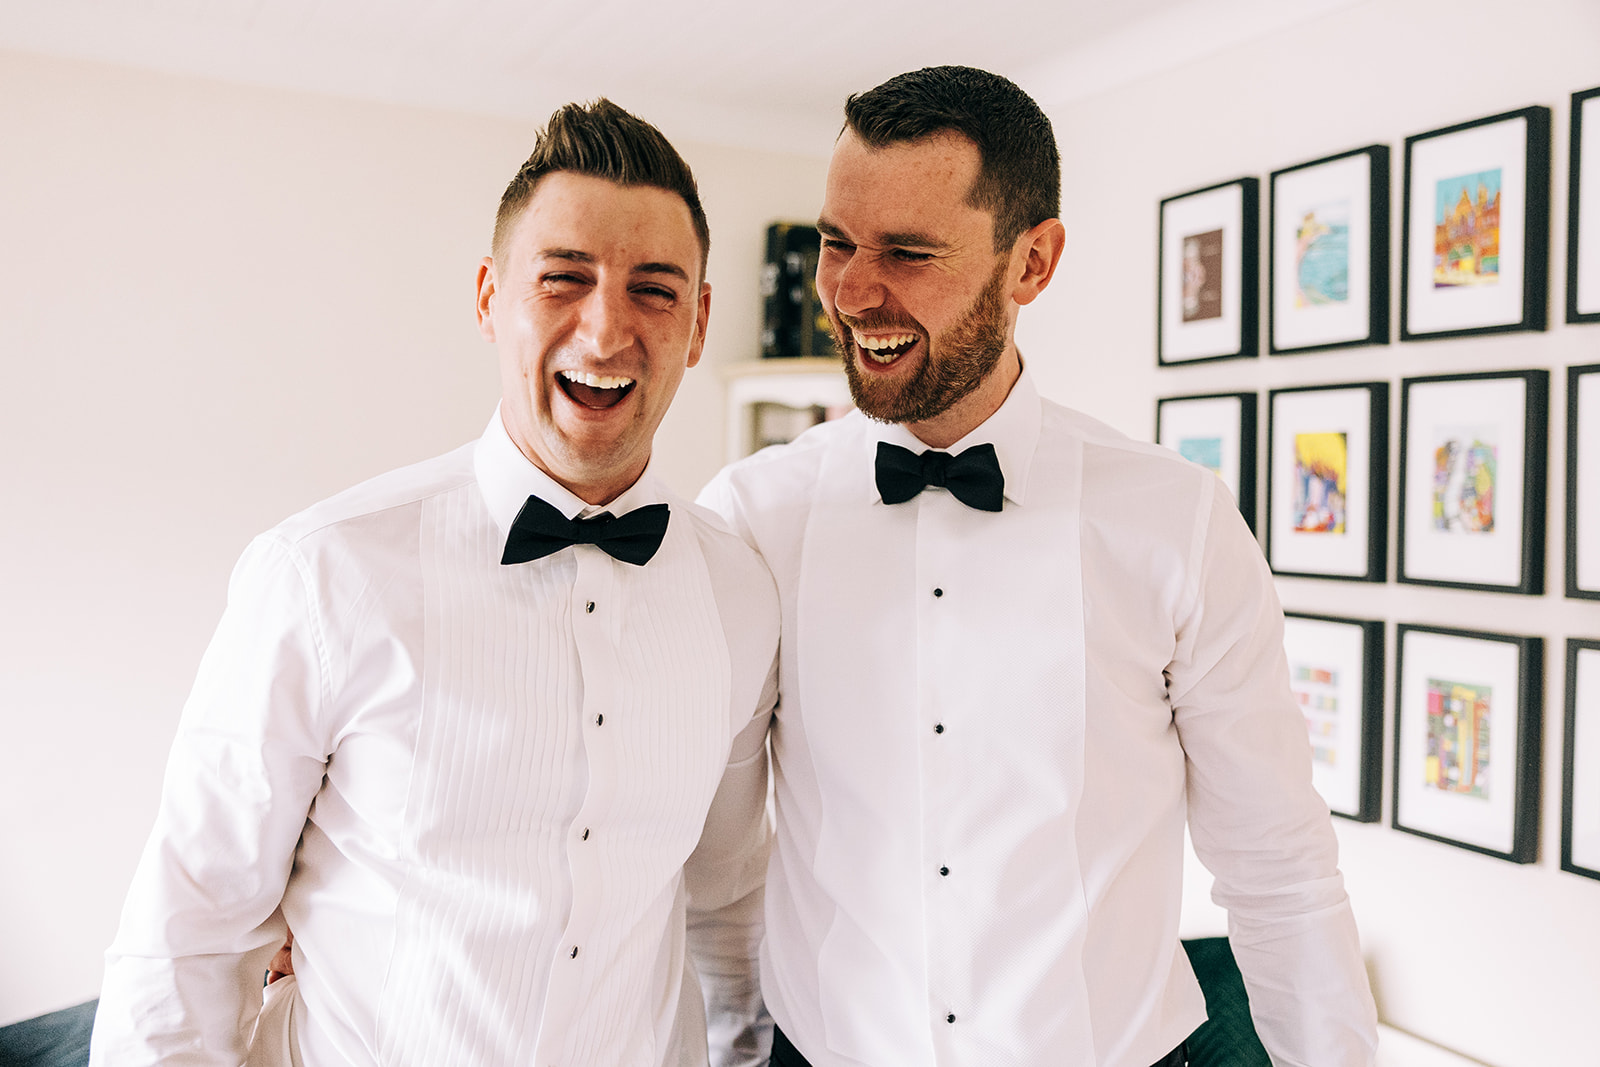 A groom and his best man sharing a joke before the ceremony starts